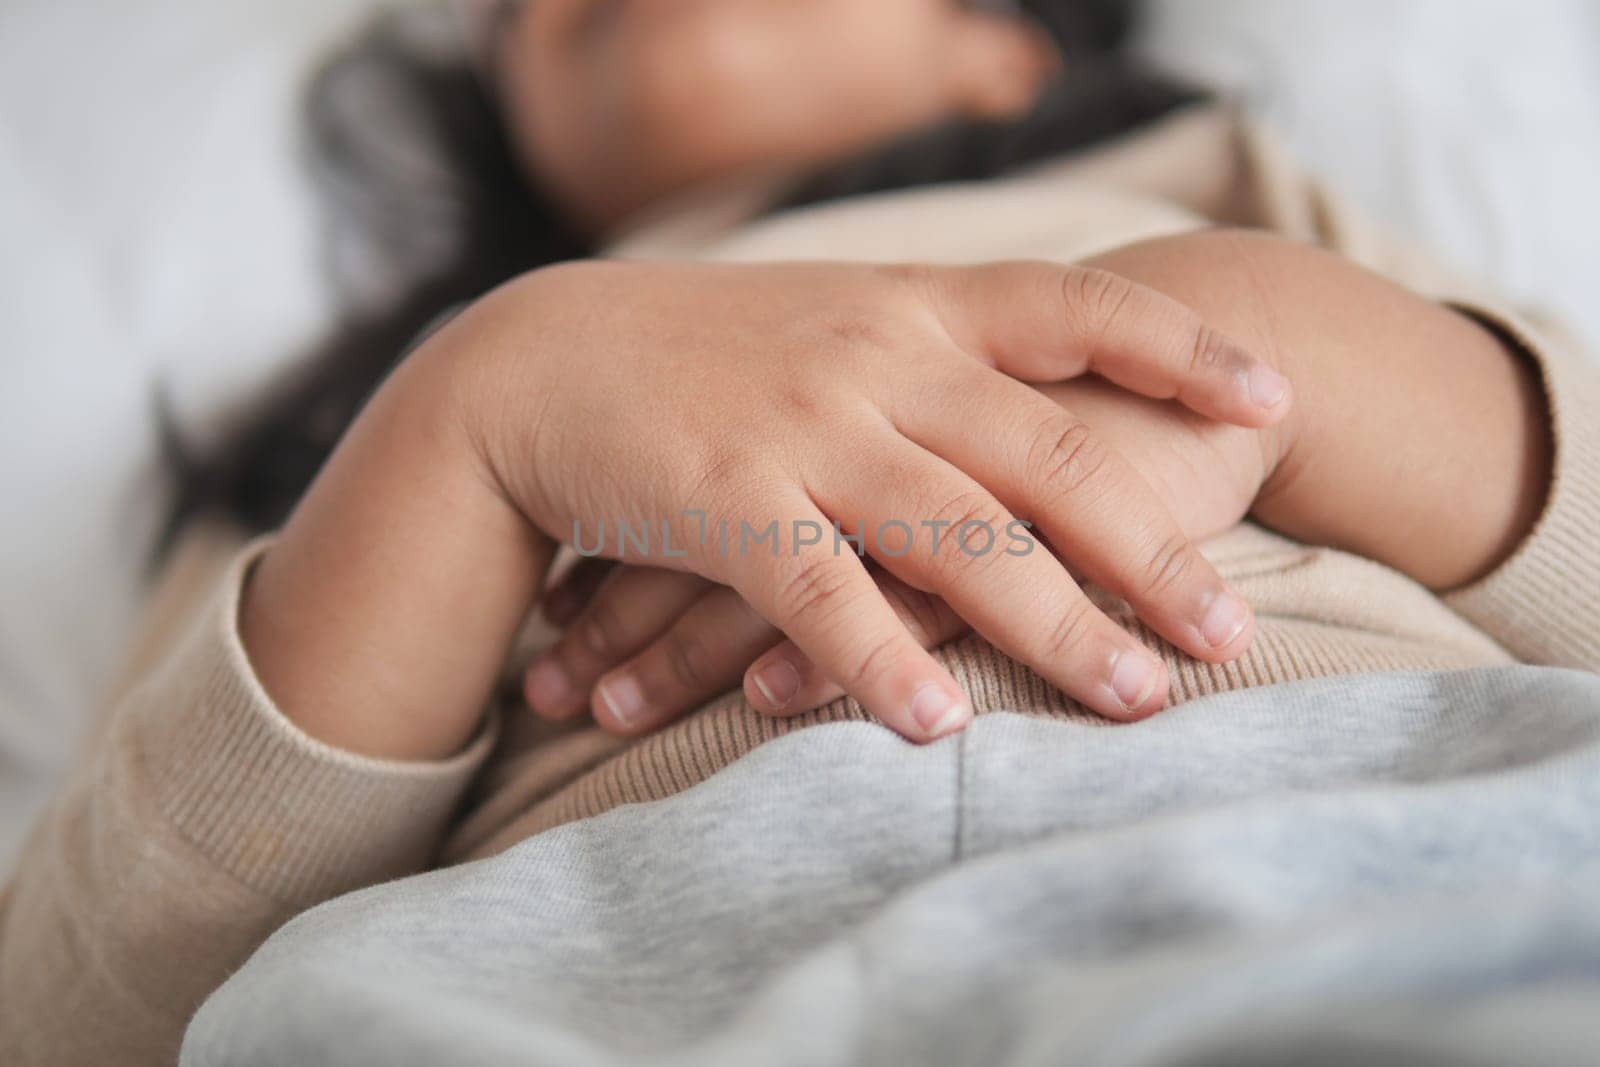 a child sleeping on bed, selective focus on hand by towfiq007